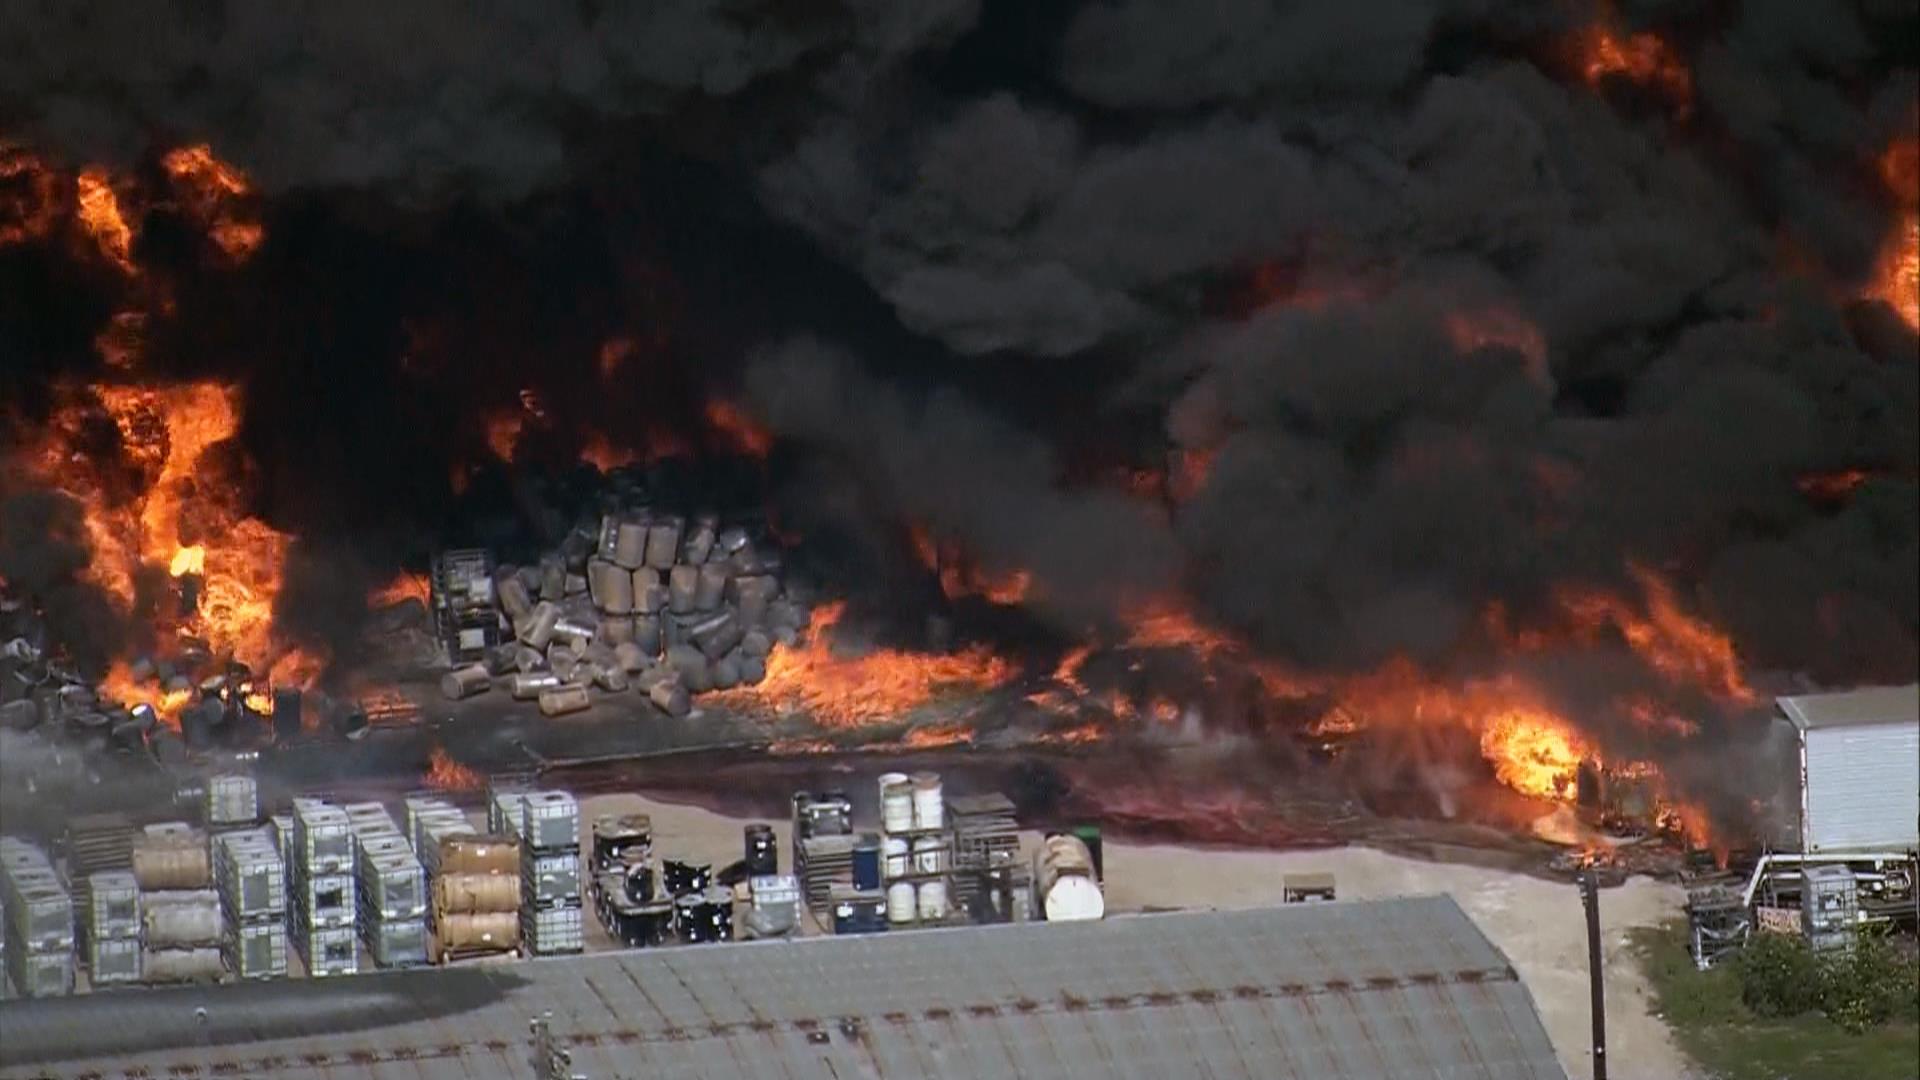 See Explosion During Huge Warehouse Fire - NBC News1920 x 1080